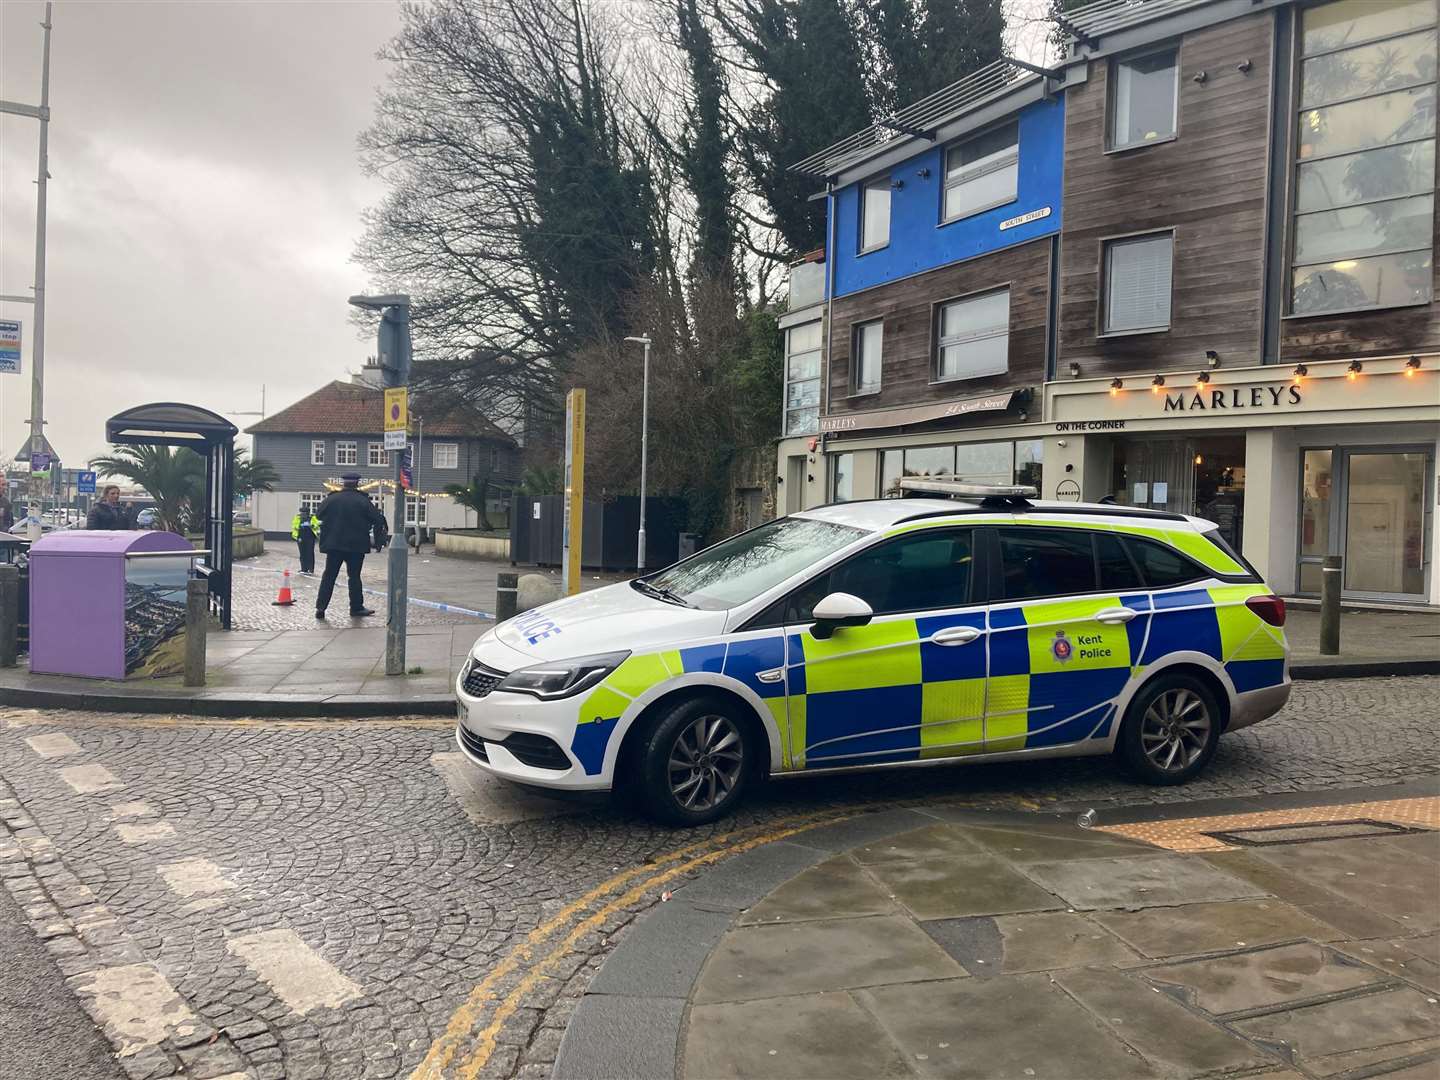 Police have launched an investigation after a man was found with serious injuries near South Street, Folkestone